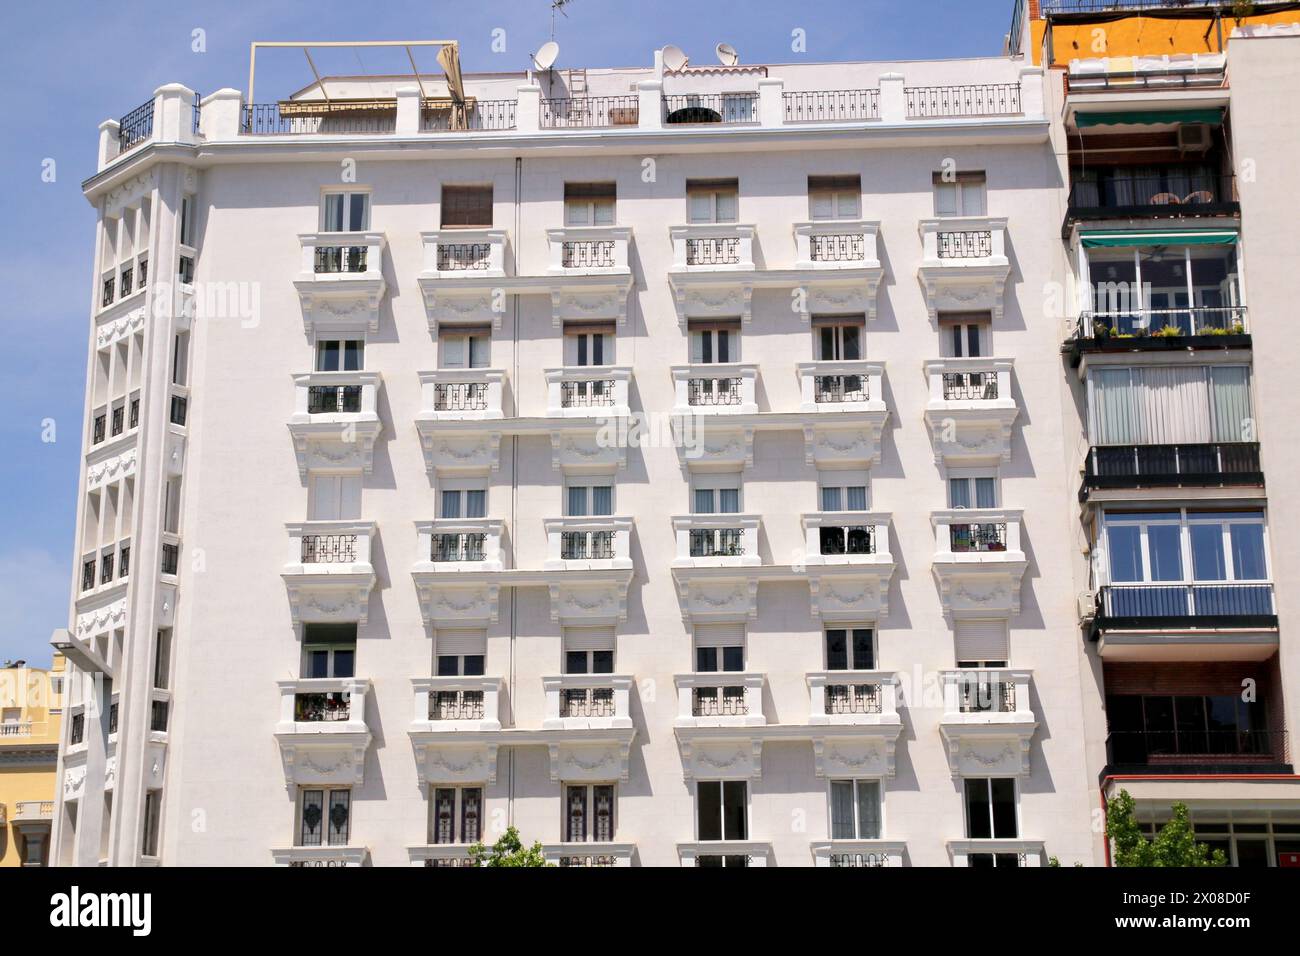 The creative architecture of Madrid, Spain. Stock Photo